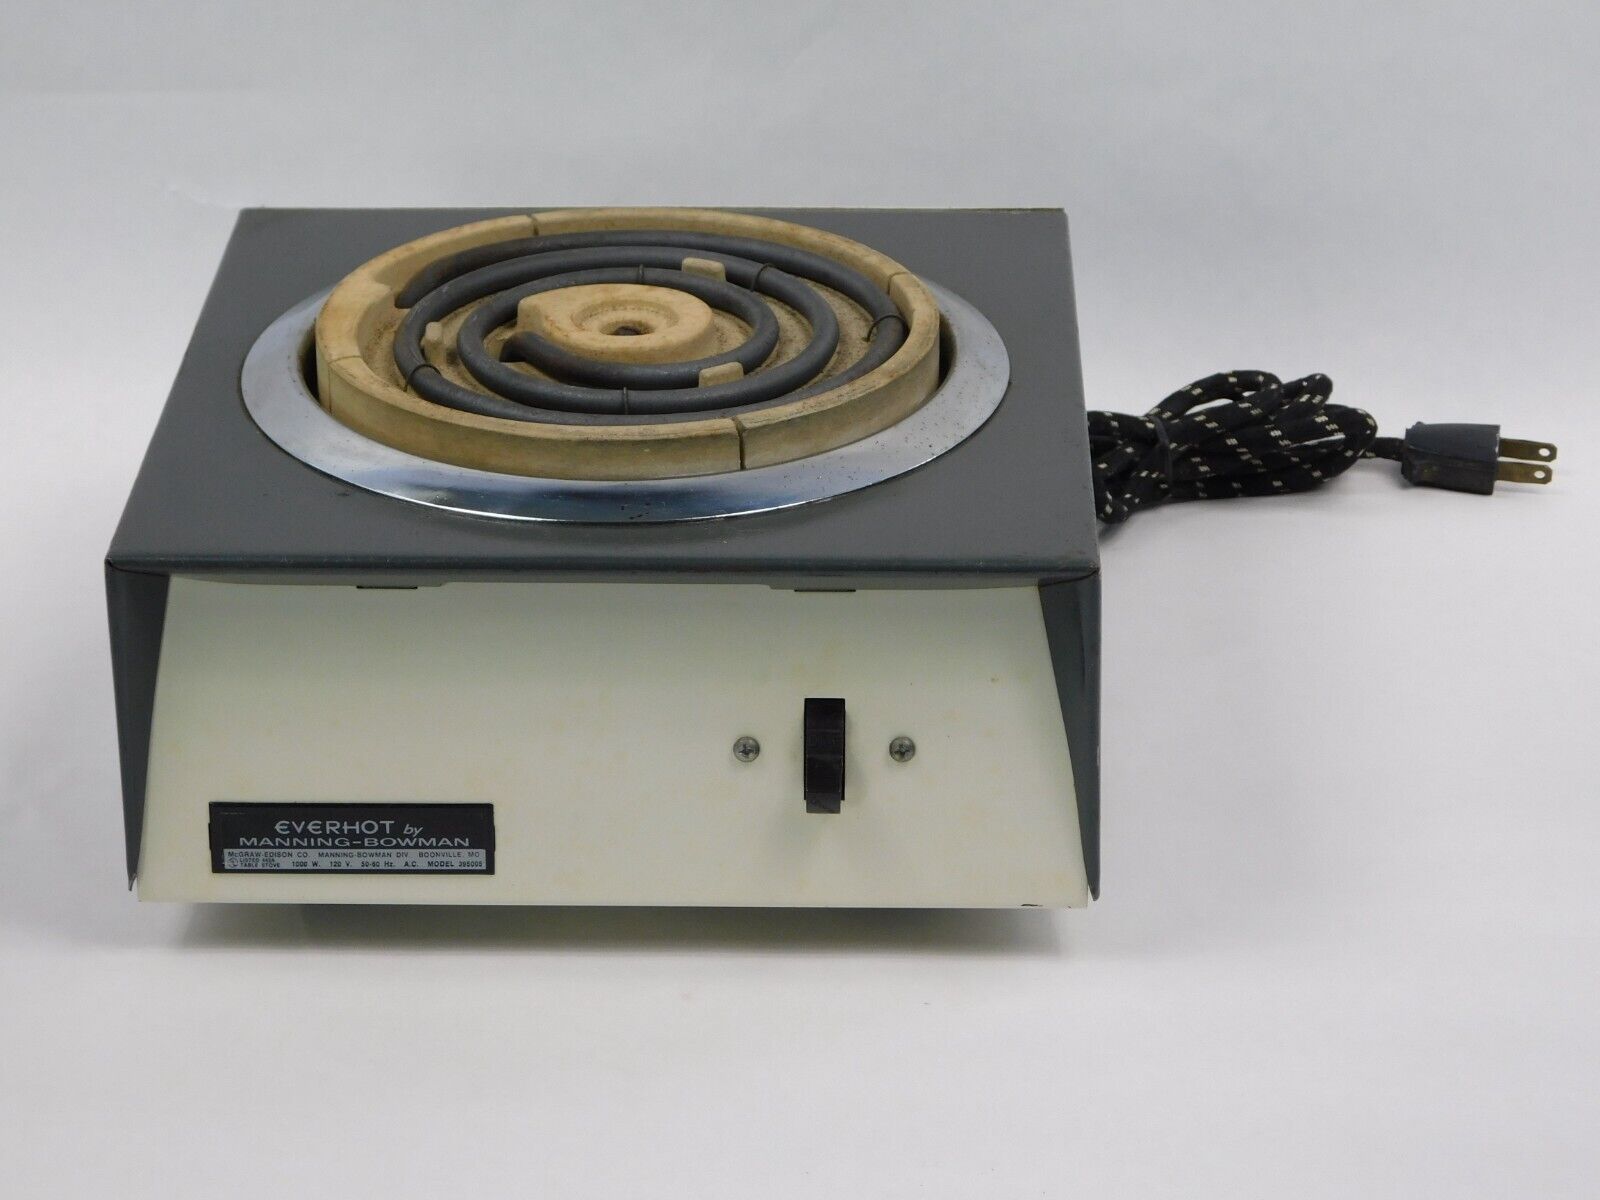 Vintage Everhot by Manning-Bowman Portable Electric Table Stove Hotplate Camping